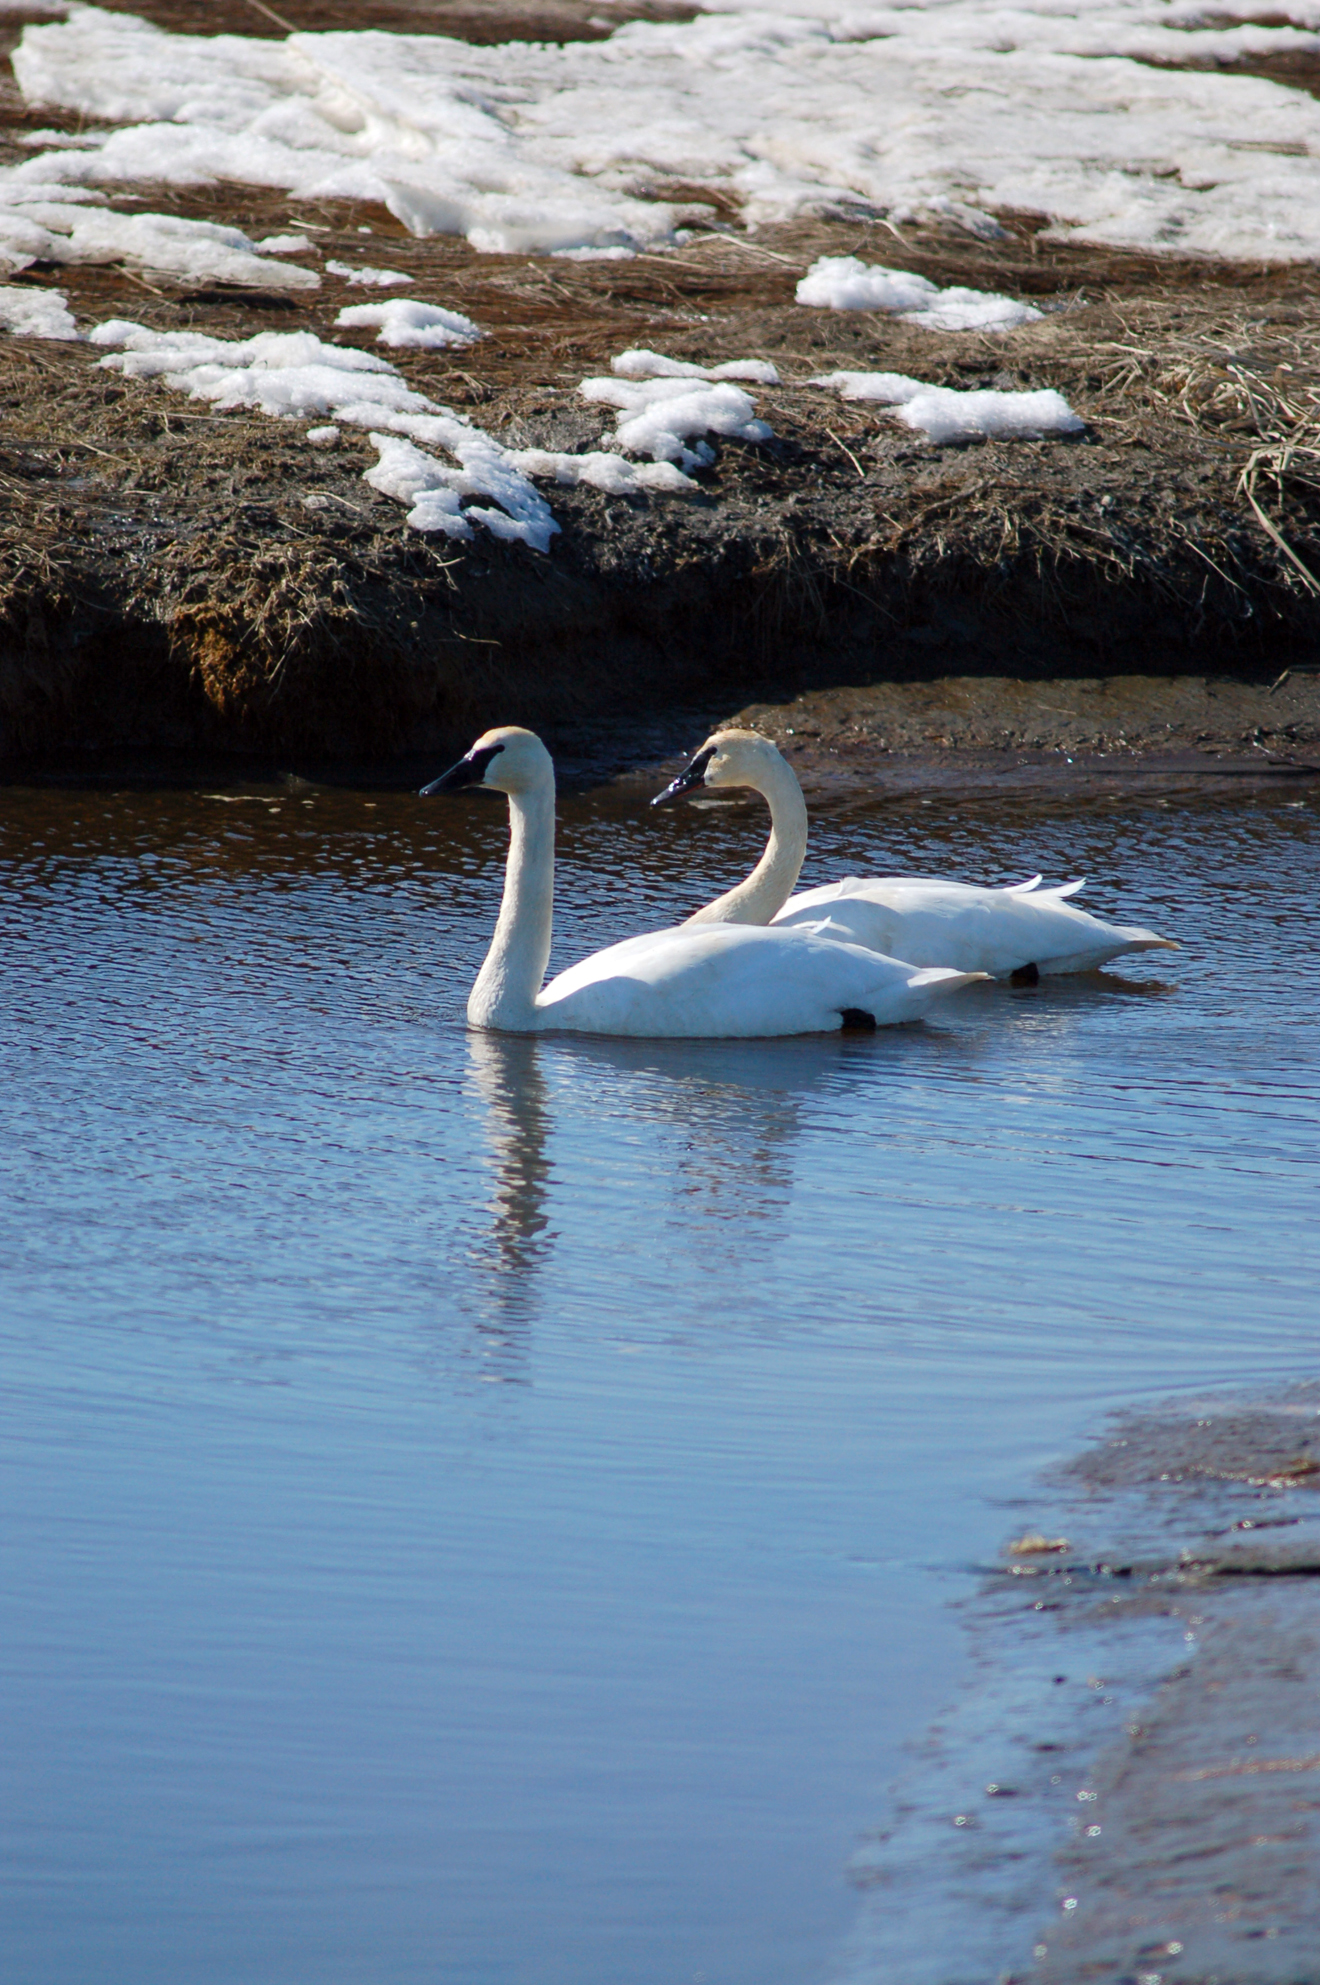 A pair of trumpeter swans swims in open water in Beluga Slough on Monday. Swans are among the first migratory birds to return to Homer each spring, with a pair reported seen the first week of April. Sandhill cranes should be returning this weekend or next week. Trumpeter